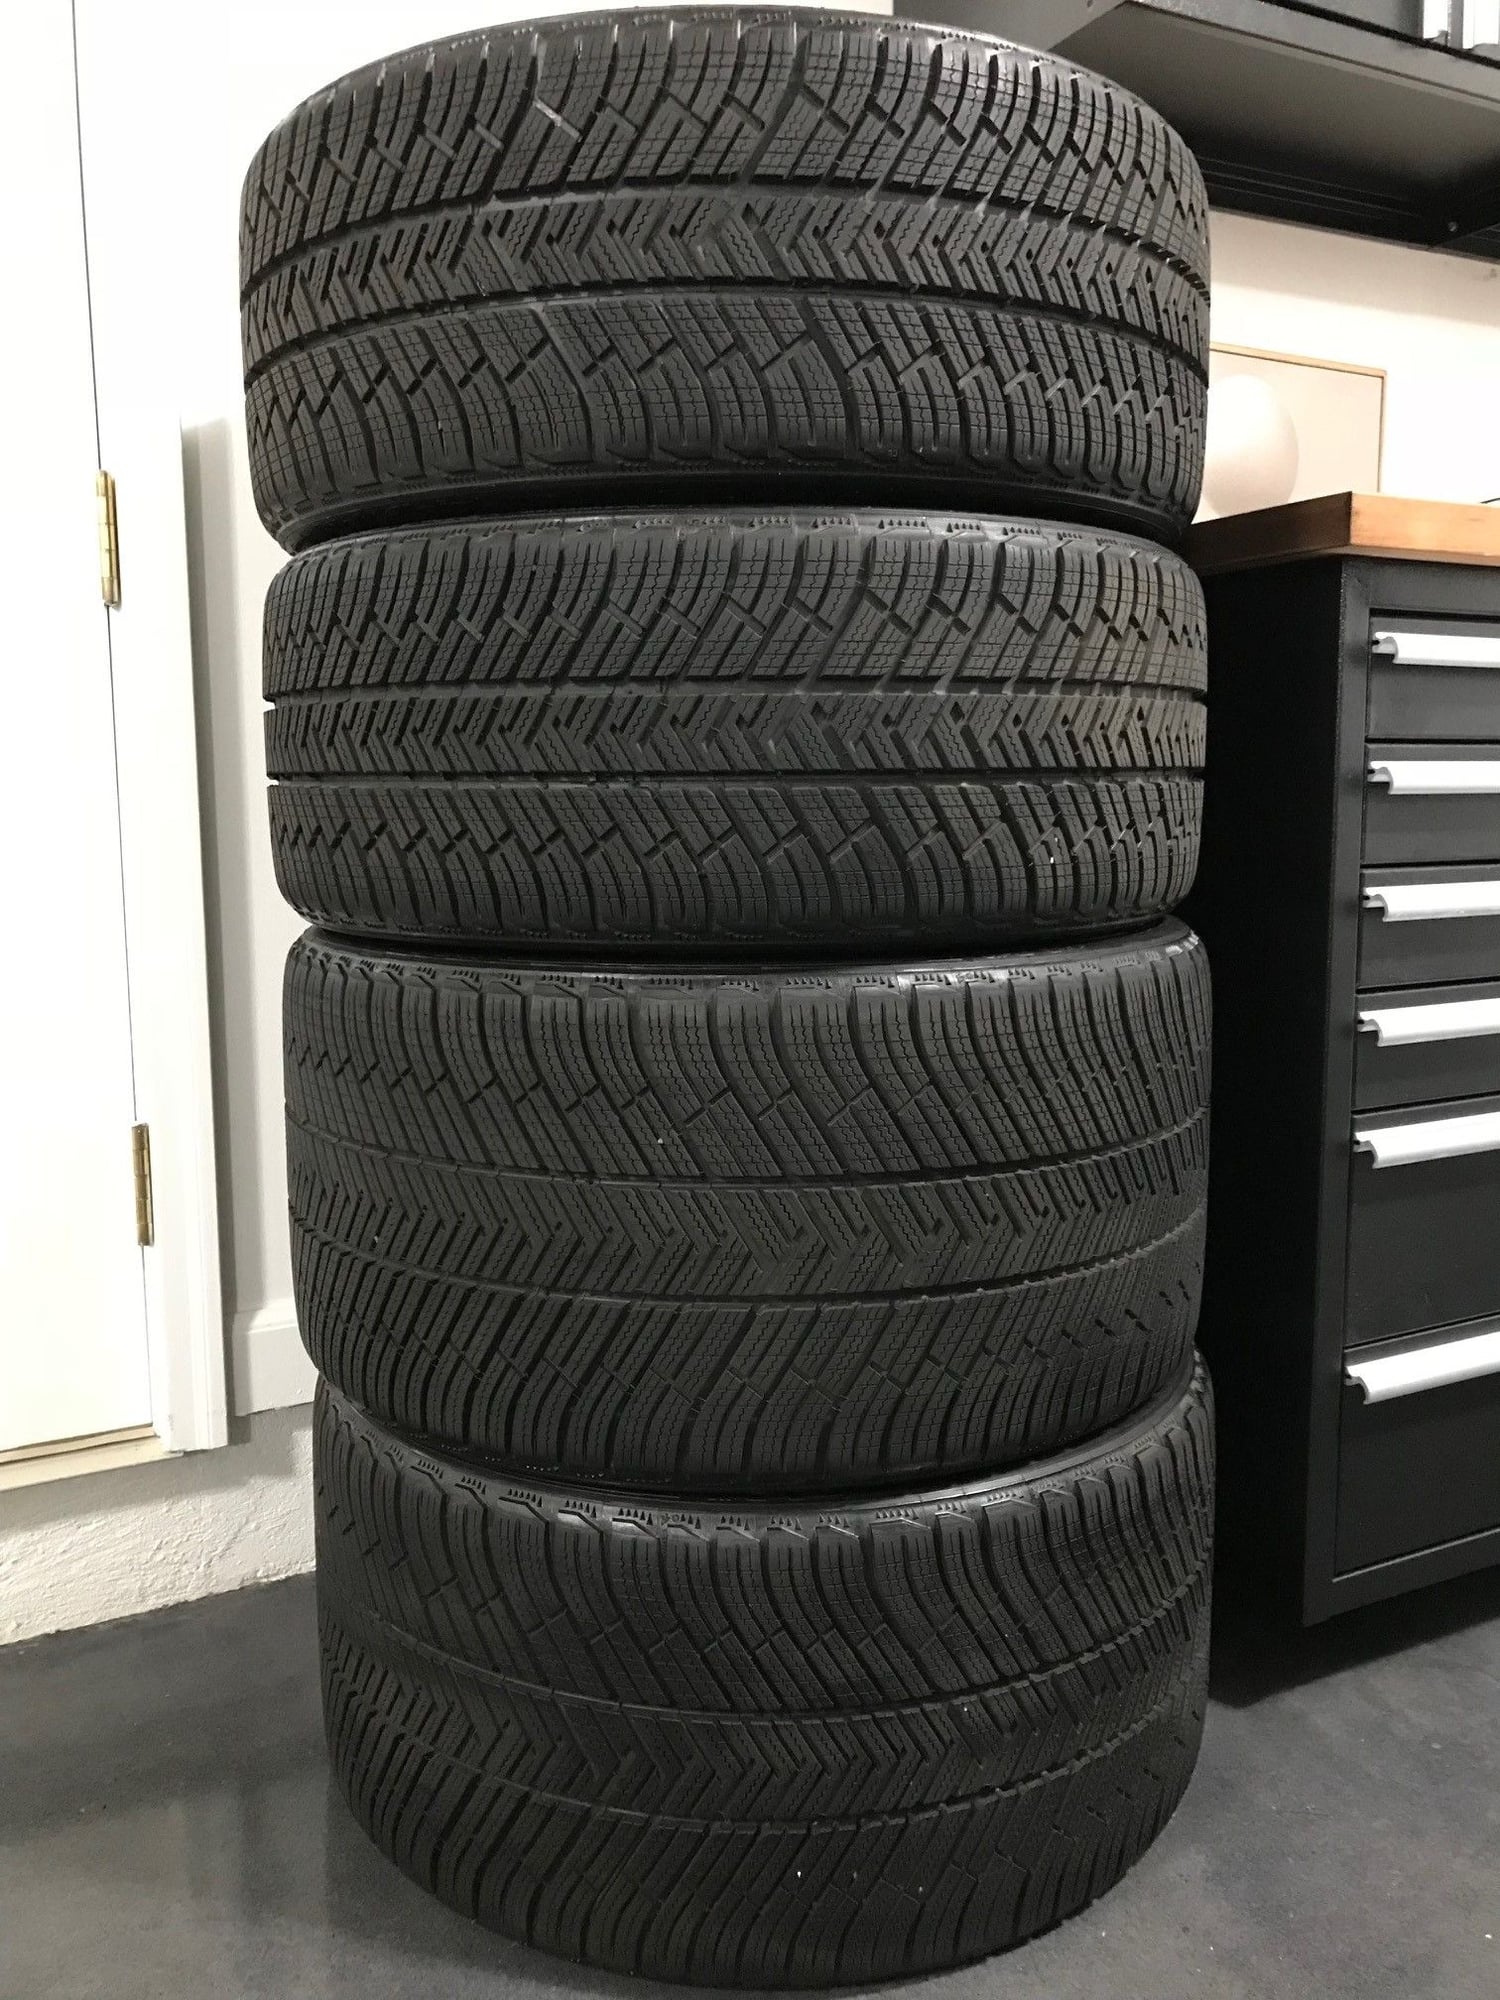 Wheels and Tires/Axles - Michelin Alpin PA4 Winter Tires for 991 - Used - 2014 to 2019 Porsche GT3 - 2012 to 2019 Porsche 911 - Summit, NJ 07901, United States